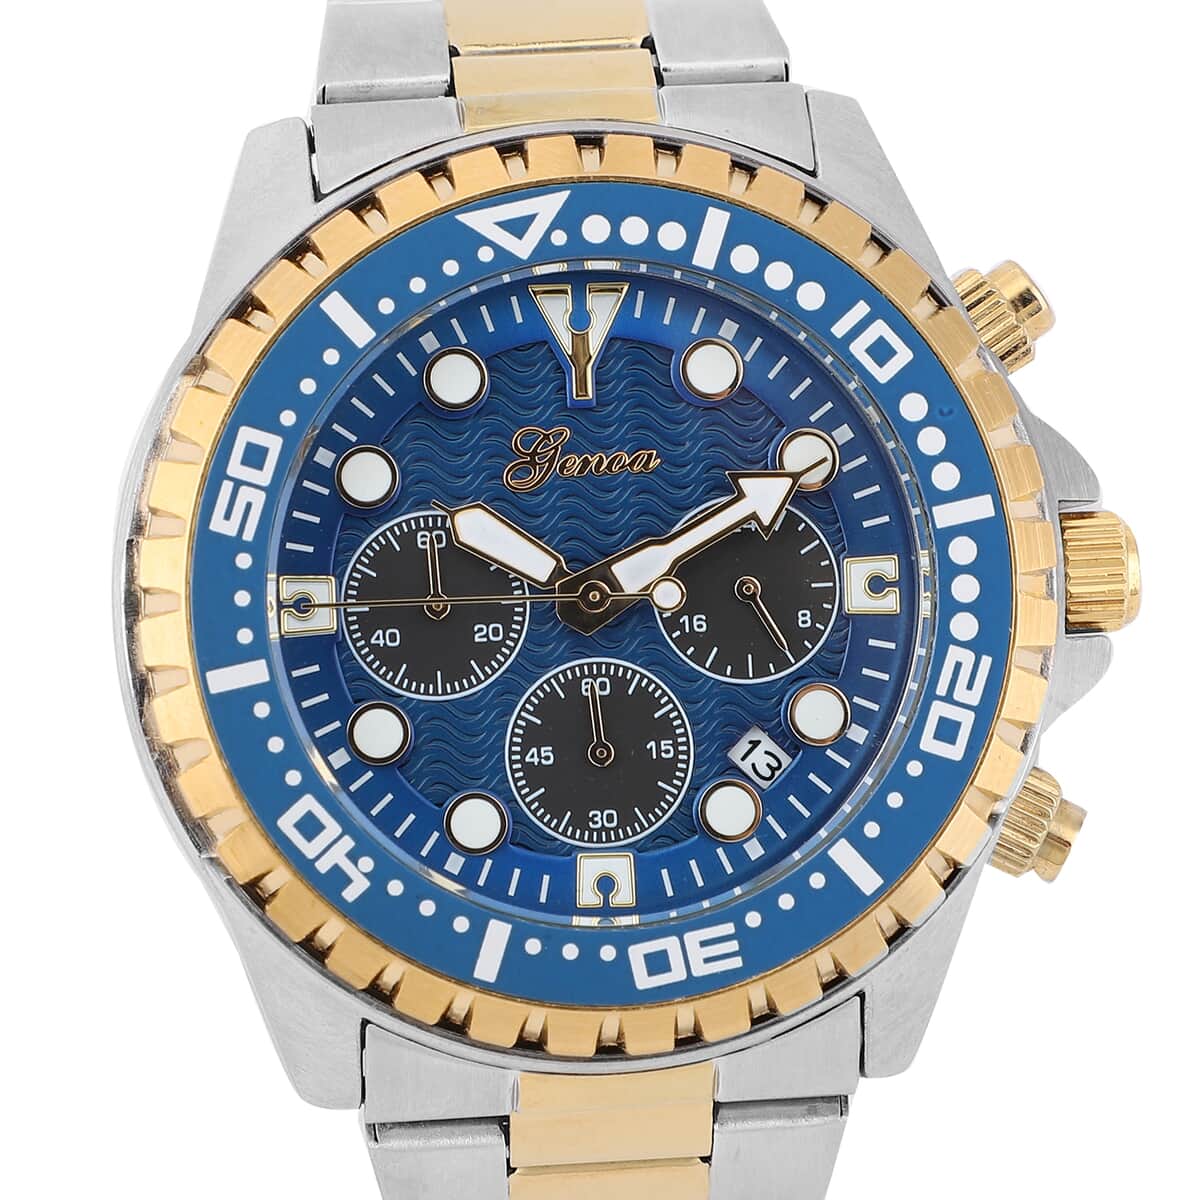 Genoa Multi-functional Quartz Movement Watch with Blue Dial & Stainless Steel Strap (46 mm) image number 3